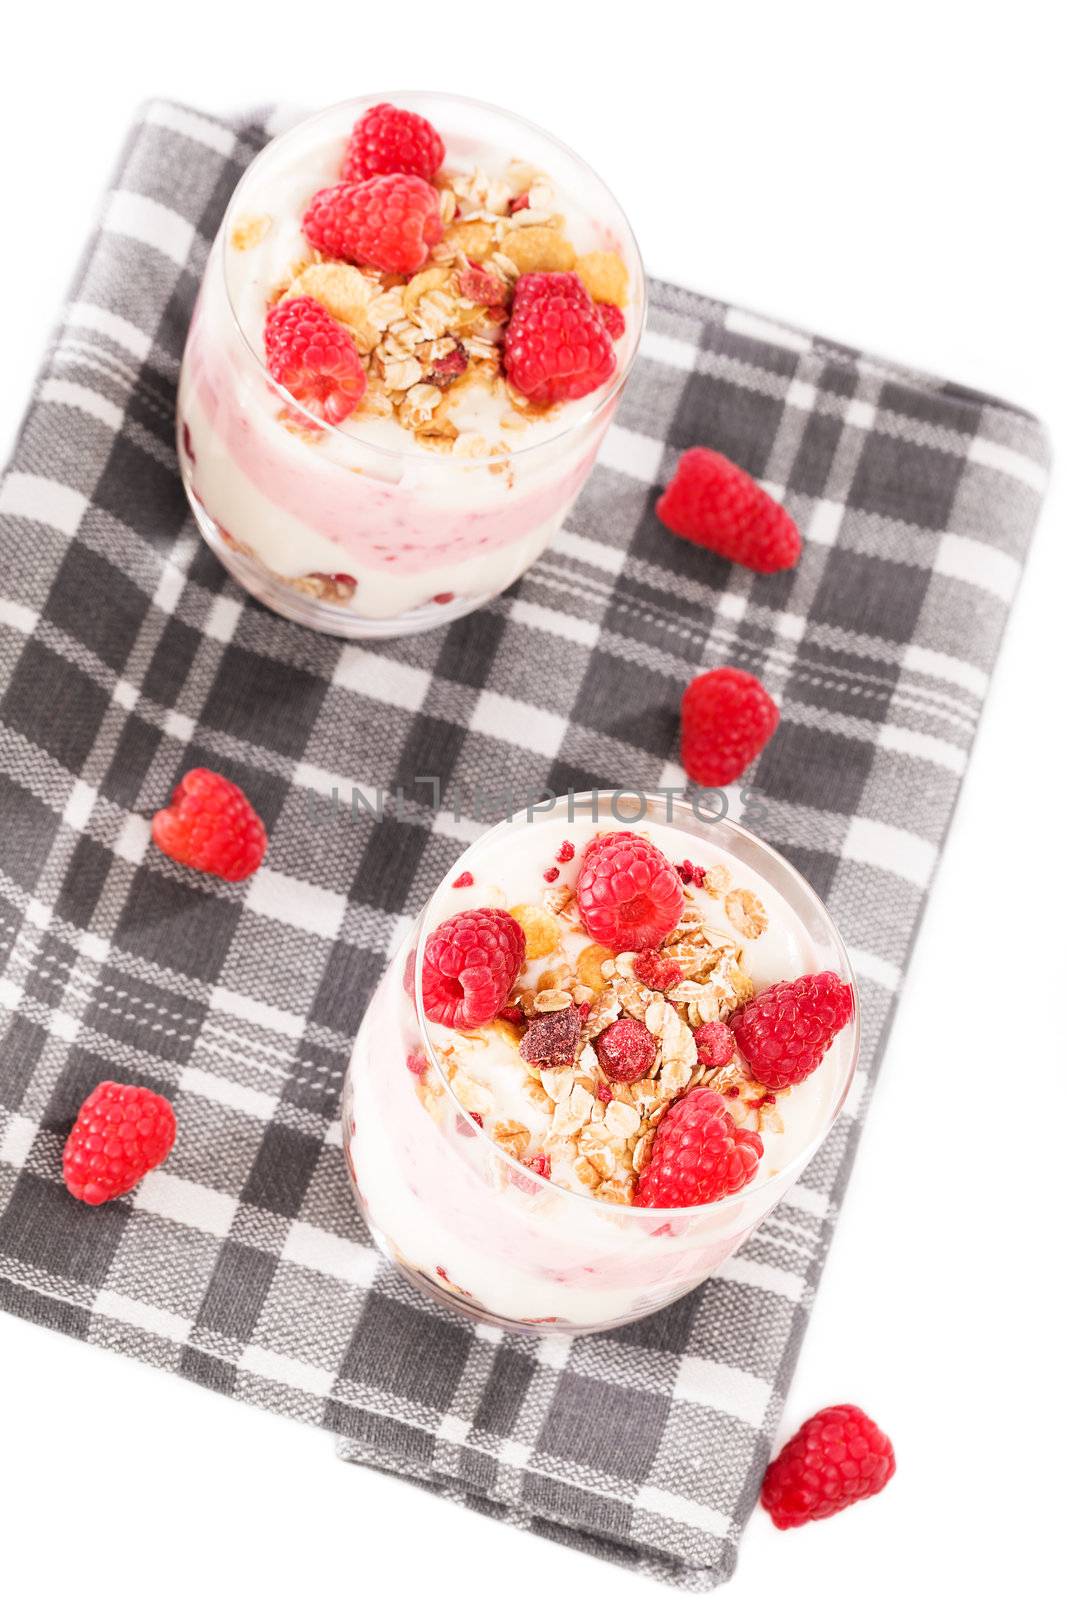 raspberry yoghurt desserts from top on a towel